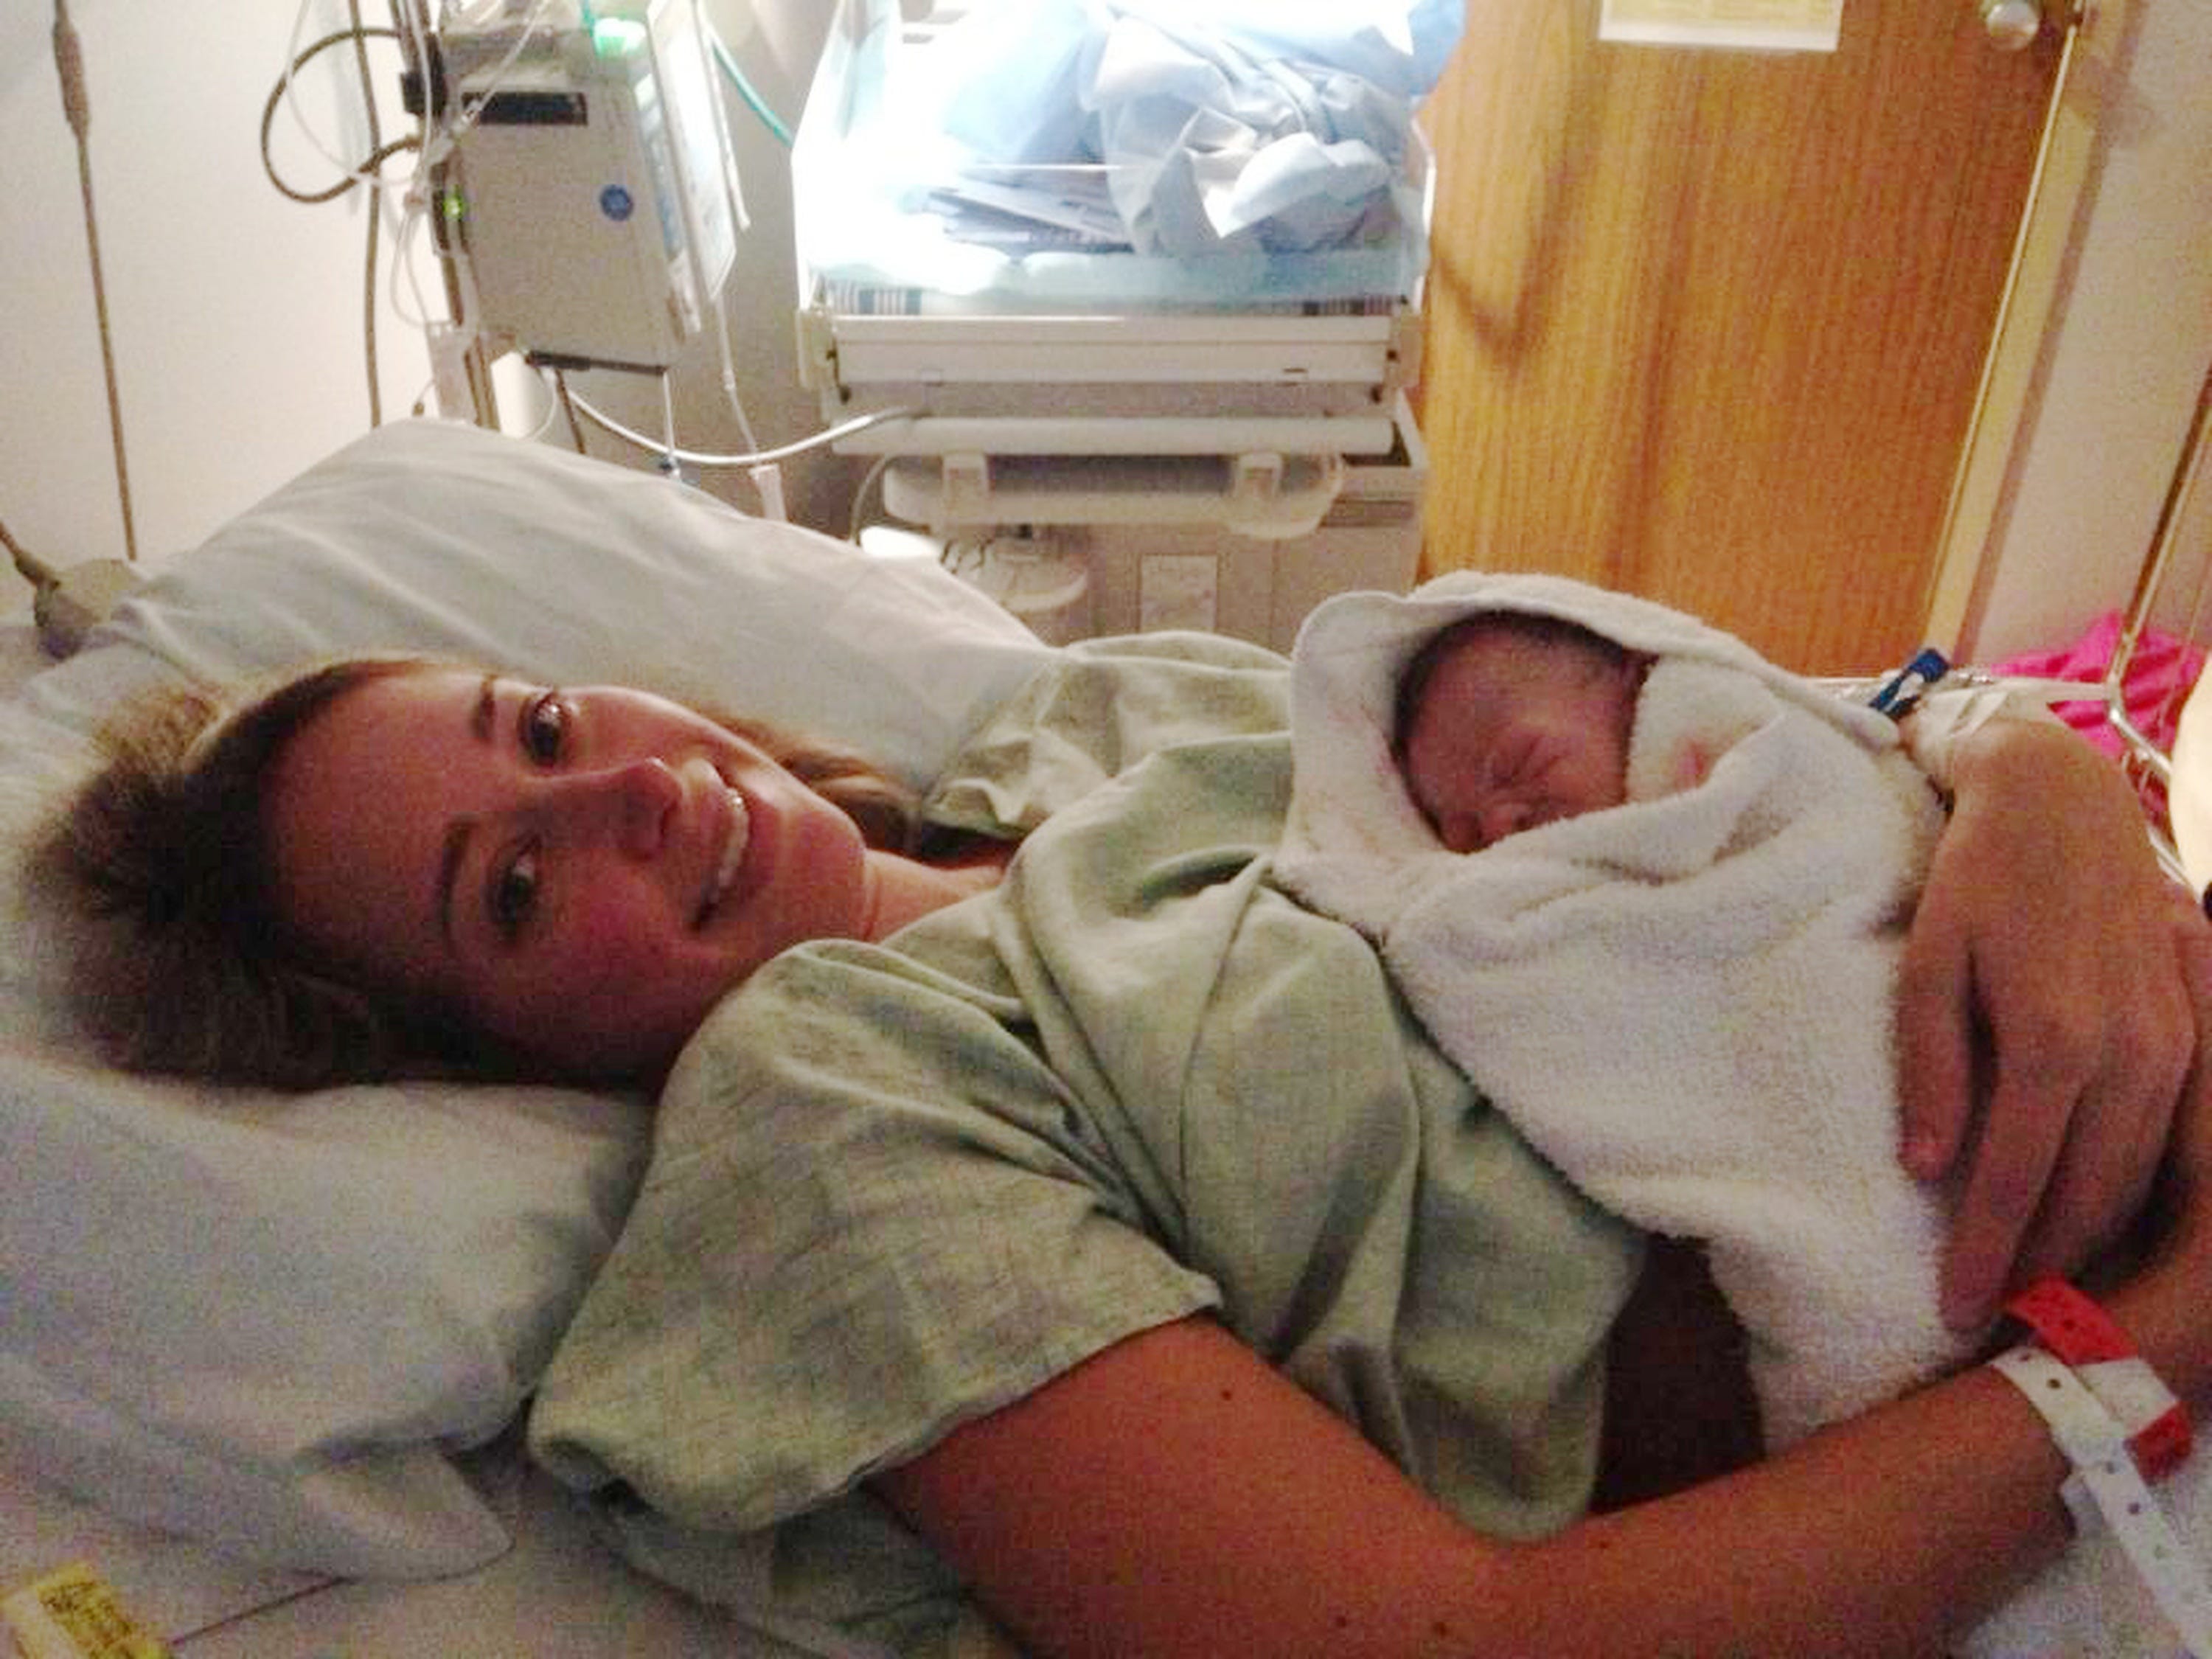 Allison Snyder said she suffered significant complications after a midwife performed an episiotomy, cutting into her rectum, during the birth of her first child in 2013 in Florida. "I could feel air passing between my rectum and vagina. I asked if this was normal and everyone told me yes," said Snyder, who was 27 at the time. Snyder, who now lives in North Carolina, said it took weeks to have the hole – called a fistula – diagnosed and repaired.